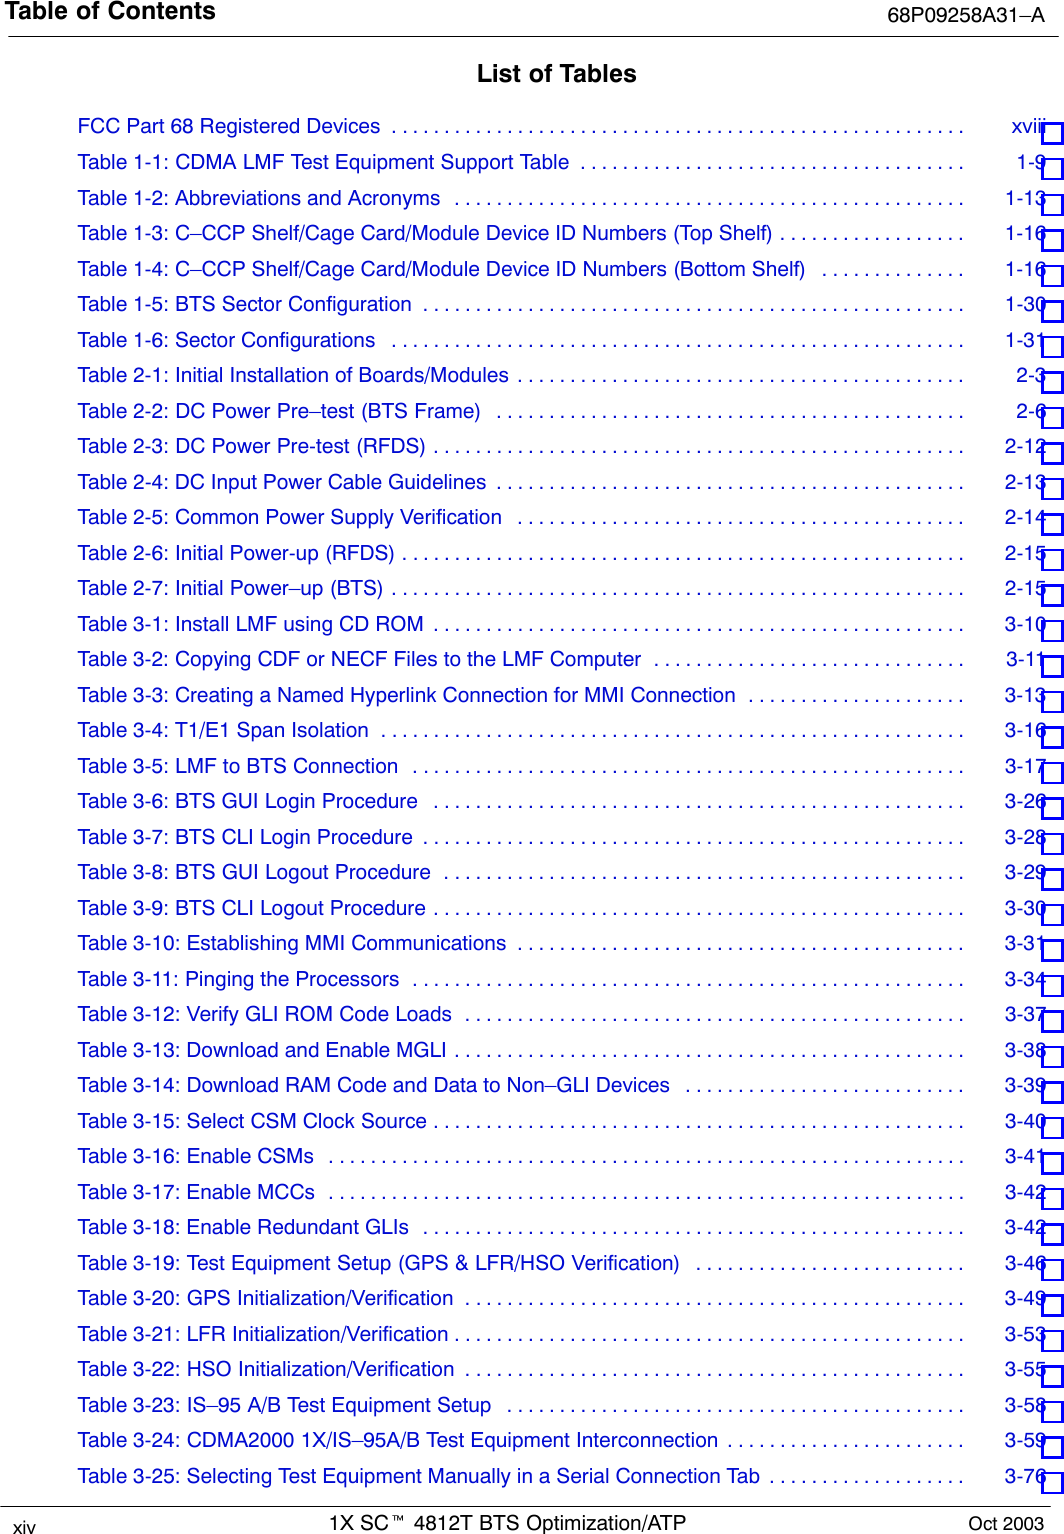 Table of Contents 68P09258A31–A1X SCt 4812T BTS Optimization/ATPxiv Oct 2003List of TablesFCC Part 68 Registered Devices xviii . . . . . . . . . . . . . . . . . . . . . . . . . . . . . . . . . . . . . . . . . . . . . . . . . . . . . . . Table 1-1: CDMA LMF Test Equipment Support Table 1-9 . . . . . . . . . . . . . . . . . . . . . . . . . . . . . . . . . . . . . Table 1-2: Abbreviations and Acronyms 1-13 . . . . . . . . . . . . . . . . . . . . . . . . . . . . . . . . . . . . . . . . . . . . . . . . . Table 1-3: C–CCP Shelf/Cage Card/Module Device ID Numbers (Top Shelf) 1-16 . . . . . . . . . . . . . . . . . . Table 1-4: C–CCP Shelf/Cage Card/Module Device ID Numbers (Bottom Shelf) 1-16 . . . . . . . . . . . . . . Table 1-5: BTS Sector Configuration 1-30 . . . . . . . . . . . . . . . . . . . . . . . . . . . . . . . . . . . . . . . . . . . . . . . . . . . . Table 1-6: Sector Configurations 1-31 . . . . . . . . . . . . . . . . . . . . . . . . . . . . . . . . . . . . . . . . . . . . . . . . . . . . . . . Table 2-1: Initial Installation of Boards/Modules 2-3 . . . . . . . . . . . . . . . . . . . . . . . . . . . . . . . . . . . . . . . . . . . Table 2-2: DC Power Pre–test (BTS Frame) 2-6 . . . . . . . . . . . . . . . . . . . . . . . . . . . . . . . . . . . . . . . . . . . . . Table 2-3: DC Power Pre-test (RFDS) 2-12 . . . . . . . . . . . . . . . . . . . . . . . . . . . . . . . . . . . . . . . . . . . . . . . . . . . Table 2-4: DC Input Power Cable Guidelines 2-13 . . . . . . . . . . . . . . . . . . . . . . . . . . . . . . . . . . . . . . . . . . . . . Table 2-5: Common Power Supply Verification 2-14 . . . . . . . . . . . . . . . . . . . . . . . . . . . . . . . . . . . . . . . . . . . Table 2-6: Initial Power-up (RFDS) 2-15 . . . . . . . . . . . . . . . . . . . . . . . . . . . . . . . . . . . . . . . . . . . . . . . . . . . . . . Table 2-7: Initial Power–up (BTS) 2-15 . . . . . . . . . . . . . . . . . . . . . . . . . . . . . . . . . . . . . . . . . . . . . . . . . . . . . . . Table 3-1: Install LMF using CD ROM 3-10 . . . . . . . . . . . . . . . . . . . . . . . . . . . . . . . . . . . . . . . . . . . . . . . . . . . Table 3-2: Copying CDF or NECF Files to the LMF Computer 3-11 . . . . . . . . . . . . . . . . . . . . . . . . . . . . . . Table 3-3: Creating a Named Hyperlink Connection for MMI Connection 3-13 . . . . . . . . . . . . . . . . . . . . . Table 3-4: T1/E1 Span Isolation 3-16 . . . . . . . . . . . . . . . . . . . . . . . . . . . . . . . . . . . . . . . . . . . . . . . . . . . . . . . . Table 3-5: LMF to BTS Connection 3-17 . . . . . . . . . . . . . . . . . . . . . . . . . . . . . . . . . . . . . . . . . . . . . . . . . . . . . Table 3-6: BTS GUI Login Procedure 3-26 . . . . . . . . . . . . . . . . . . . . . . . . . . . . . . . . . . . . . . . . . . . . . . . . . . . Table 3-7: BTS CLI Login Procedure 3-28 . . . . . . . . . . . . . . . . . . . . . . . . . . . . . . . . . . . . . . . . . . . . . . . . . . . . Table 3-8: BTS GUI Logout Procedure 3-29 . . . . . . . . . . . . . . . . . . . . . . . . . . . . . . . . . . . . . . . . . . . . . . . . . . Table 3-9: BTS CLI Logout Procedure 3-30 . . . . . . . . . . . . . . . . . . . . . . . . . . . . . . . . . . . . . . . . . . . . . . . . . . . Table 3-10: Establishing MMI Communications 3-31 . . . . . . . . . . . . . . . . . . . . . . . . . . . . . . . . . . . . . . . . . . . Table 3-11: Pinging the Processors 3-34 . . . . . . . . . . . . . . . . . . . . . . . . . . . . . . . . . . . . . . . . . . . . . . . . . . . . . Table 3-12: Verify GLI ROM Code Loads 3-37 . . . . . . . . . . . . . . . . . . . . . . . . . . . . . . . . . . . . . . . . . . . . . . . . Table 3-13: Download and Enable MGLI 3-38 . . . . . . . . . . . . . . . . . . . . . . . . . . . . . . . . . . . . . . . . . . . . . . . . . Table 3-14: Download RAM Code and Data to Non–GLI Devices 3-39 . . . . . . . . . . . . . . . . . . . . . . . . . . . Table 3-15: Select CSM Clock Source 3-40 . . . . . . . . . . . . . . . . . . . . . . . . . . . . . . . . . . . . . . . . . . . . . . . . . . . Table 3-16: Enable CSMs 3-41 . . . . . . . . . . . . . . . . . . . . . . . . . . . . . . . . . . . . . . . . . . . . . . . . . . . . . . . . . . . . . Table 3-17: Enable MCCs 3-42 . . . . . . . . . . . . . . . . . . . . . . . . . . . . . . . . . . . . . . . . . . . . . . . . . . . . . . . . . . . . . Table 3-18: Enable Redundant GLIs 3-42 . . . . . . . . . . . . . . . . . . . . . . . . . . . . . . . . . . . . . . . . . . . . . . . . . . . . Table 3-19: Test Equipment Setup (GPS &amp; LFR/HSO Verification) 3-46 . . . . . . . . . . . . . . . . . . . . . . . . . . Table 3-20: GPS Initialization/Verification 3-49 . . . . . . . . . . . . . . . . . . . . . . . . . . . . . . . . . . . . . . . . . . . . . . . . Table 3-21: LFR Initialization/Verification 3-53 . . . . . . . . . . . . . . . . . . . . . . . . . . . . . . . . . . . . . . . . . . . . . . . . . Table 3-22: HSO Initialization/Verification 3-55 . . . . . . . . . . . . . . . . . . . . . . . . . . . . . . . . . . . . . . . . . . . . . . . . Table 3-23: IS–95 A/B Test Equipment Setup 3-58 . . . . . . . . . . . . . . . . . . . . . . . . . . . . . . . . . . . . . . . . . . . . Table 3-24: CDMA2000 1X/IS–95A/B Test Equipment Interconnection 3-59 . . . . . . . . . . . . . . . . . . . . . . . Table 3-25: Selecting Test Equipment Manually in a Serial Connection Tab 3-76 . . . . . . . . . . . . . . . . . . . 